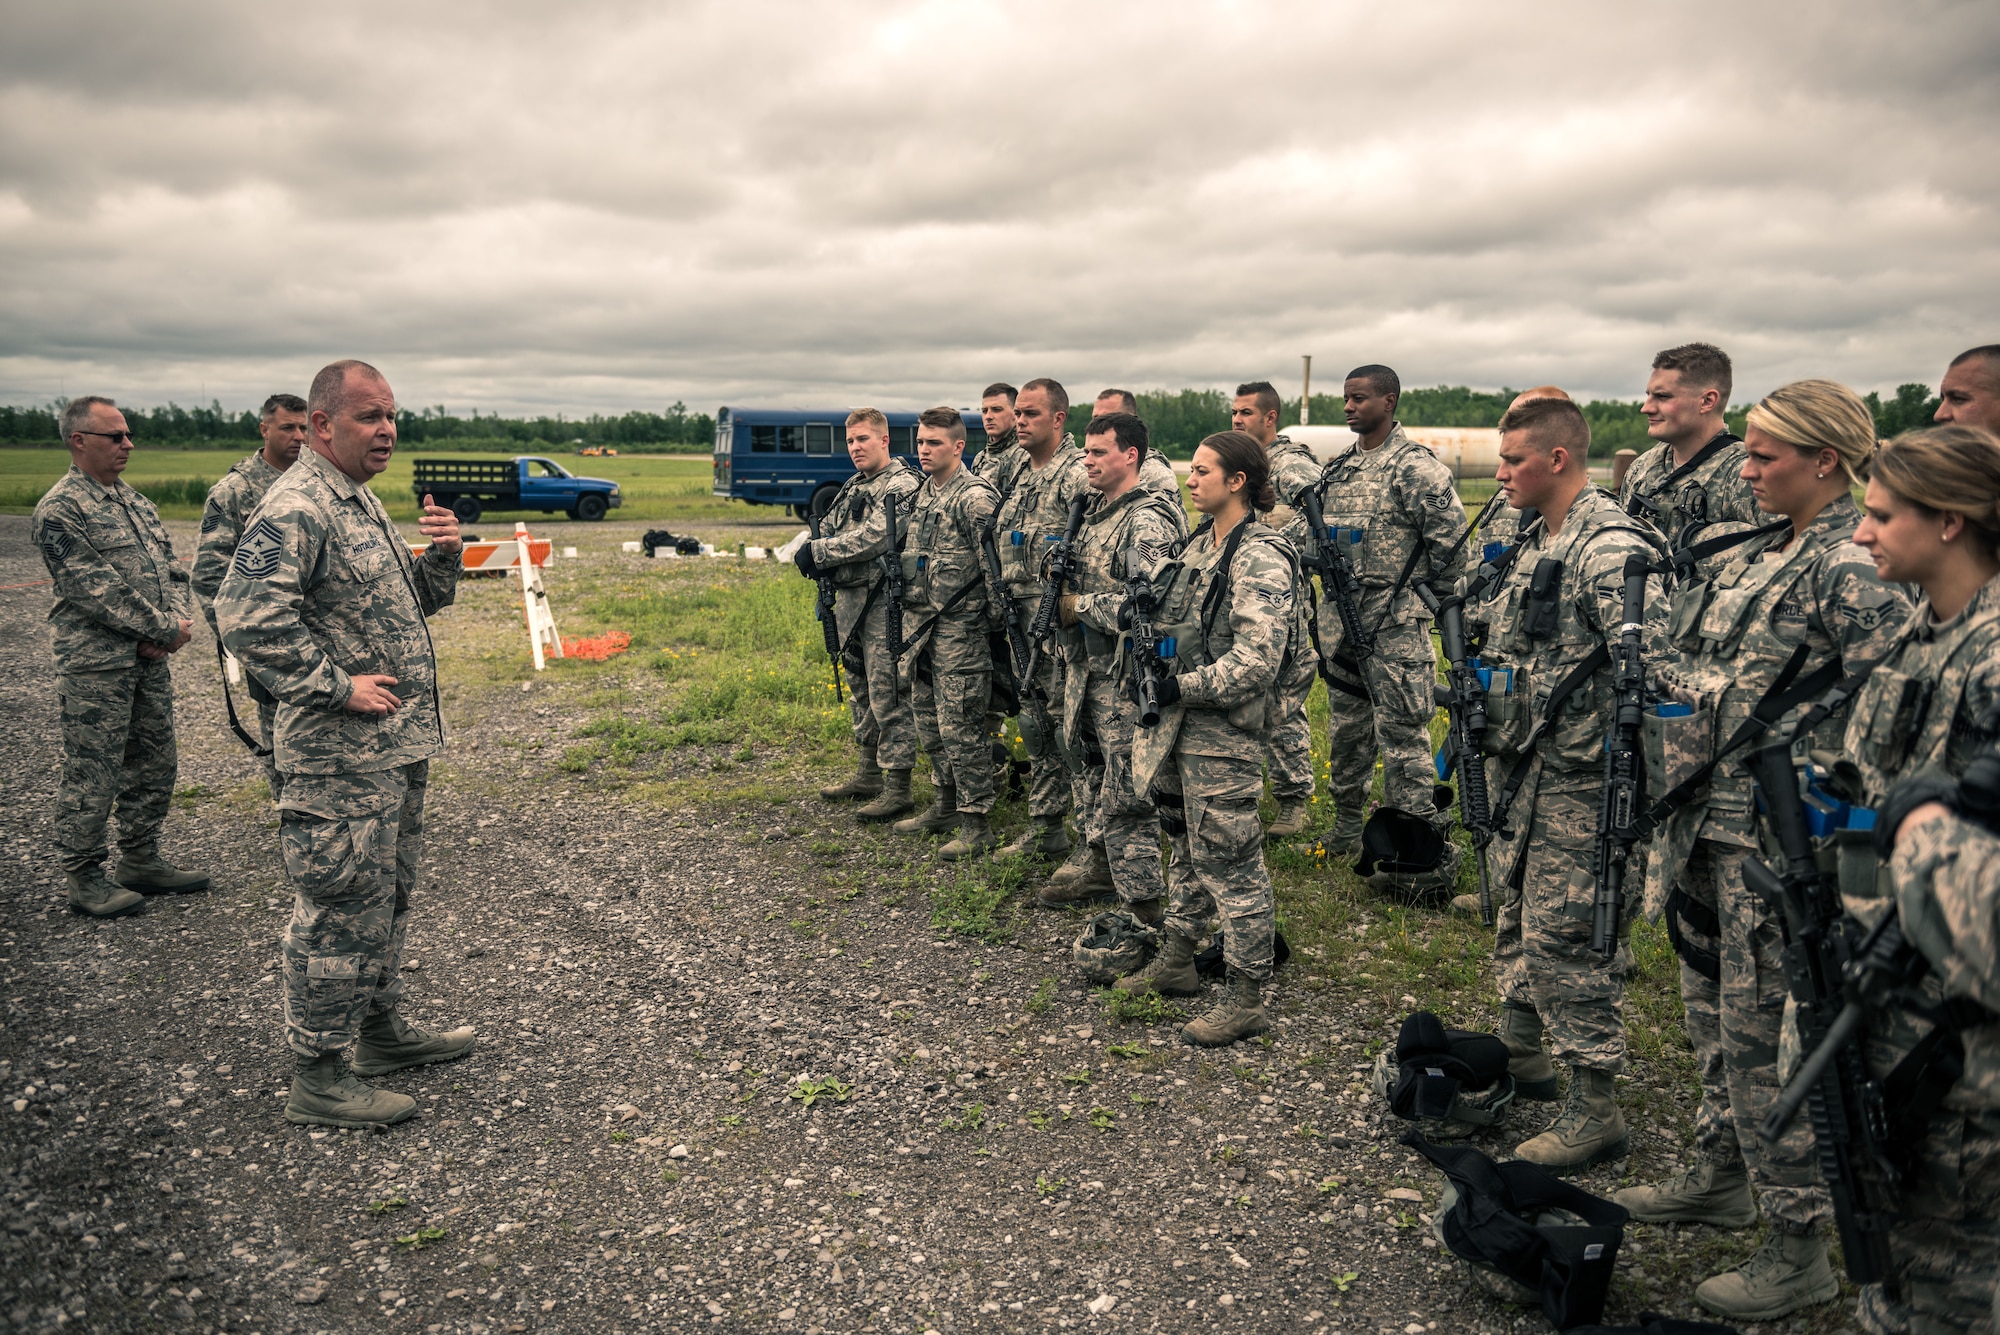 Chief Master Sgt. James W. Hotaling, Command Chief Master Sergeant of the Air National Guard, addresses members of the 107th AW Security Forces after participating in a “shoot and move” exercise in response to a Chief’s Challenge at Niagara Falls Air Reserve Station on June 13, 2015. (U.S. Air National Guard photo/Staff Sgt. Ryan Campbell)